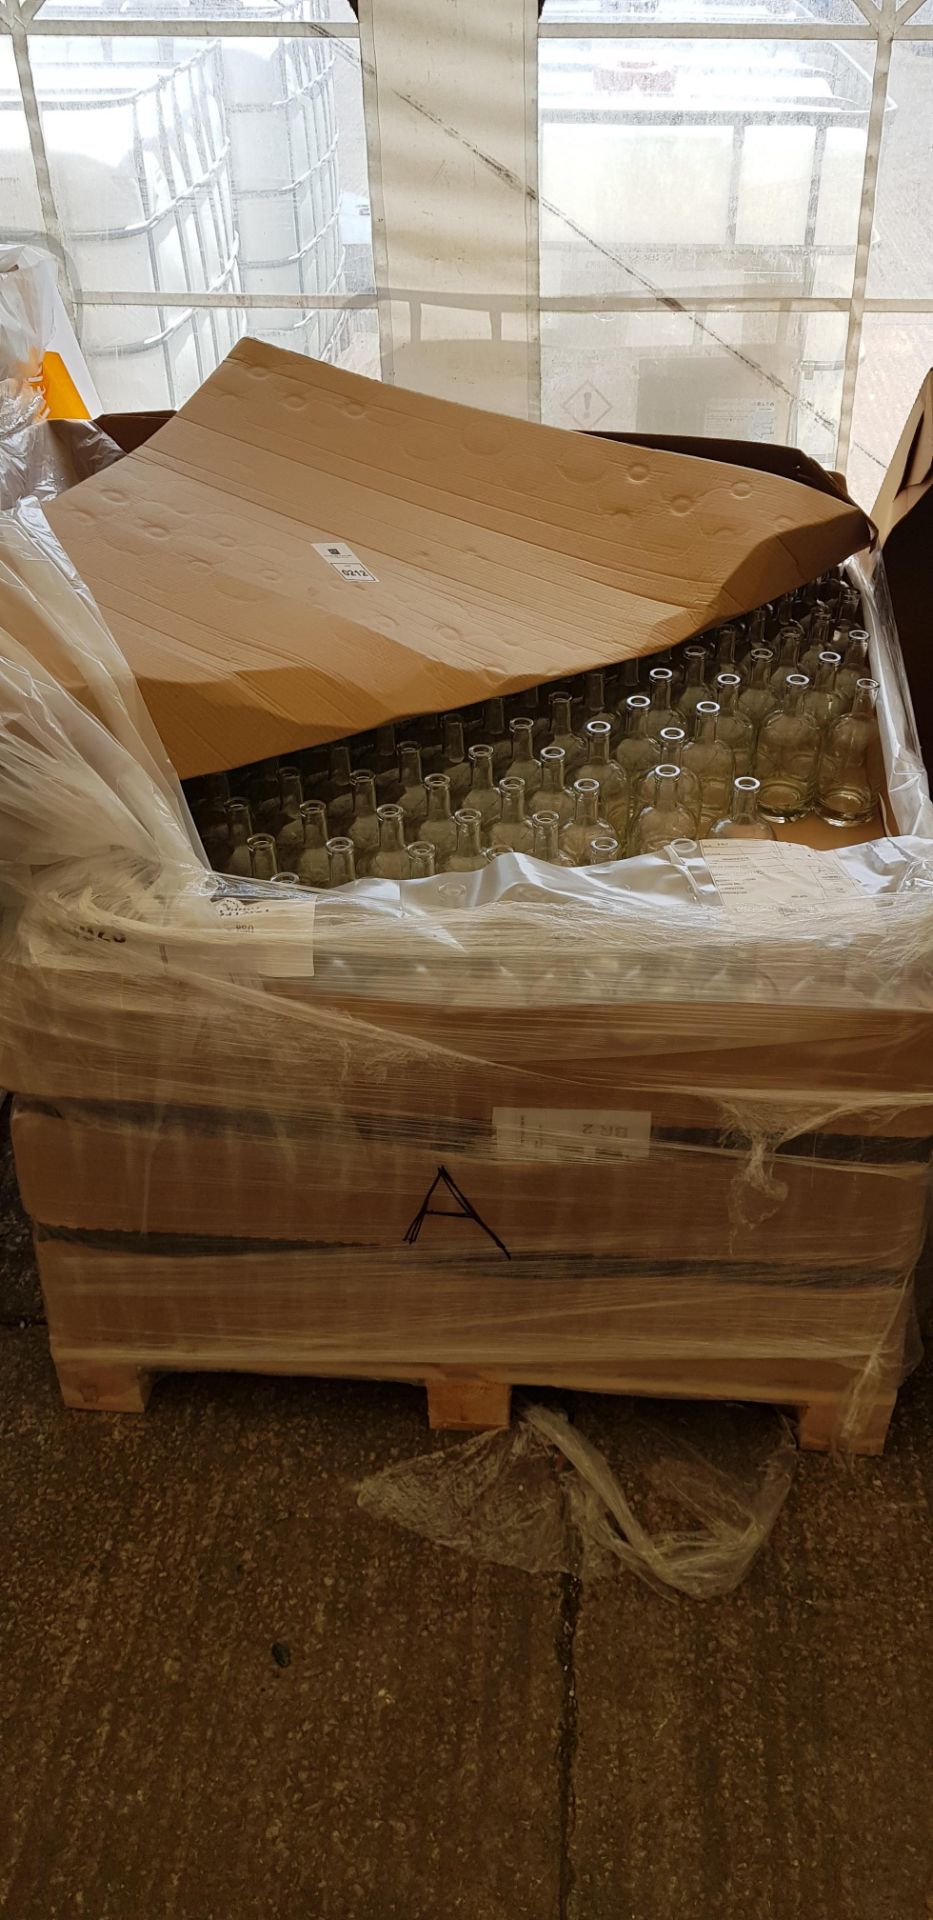 400 X BRAND NEW NOCTURNE 500ML CORK MOUTH GLASS BOTTLES (HEIGHT 20CM) ON 1 PALLET - Image 2 of 2